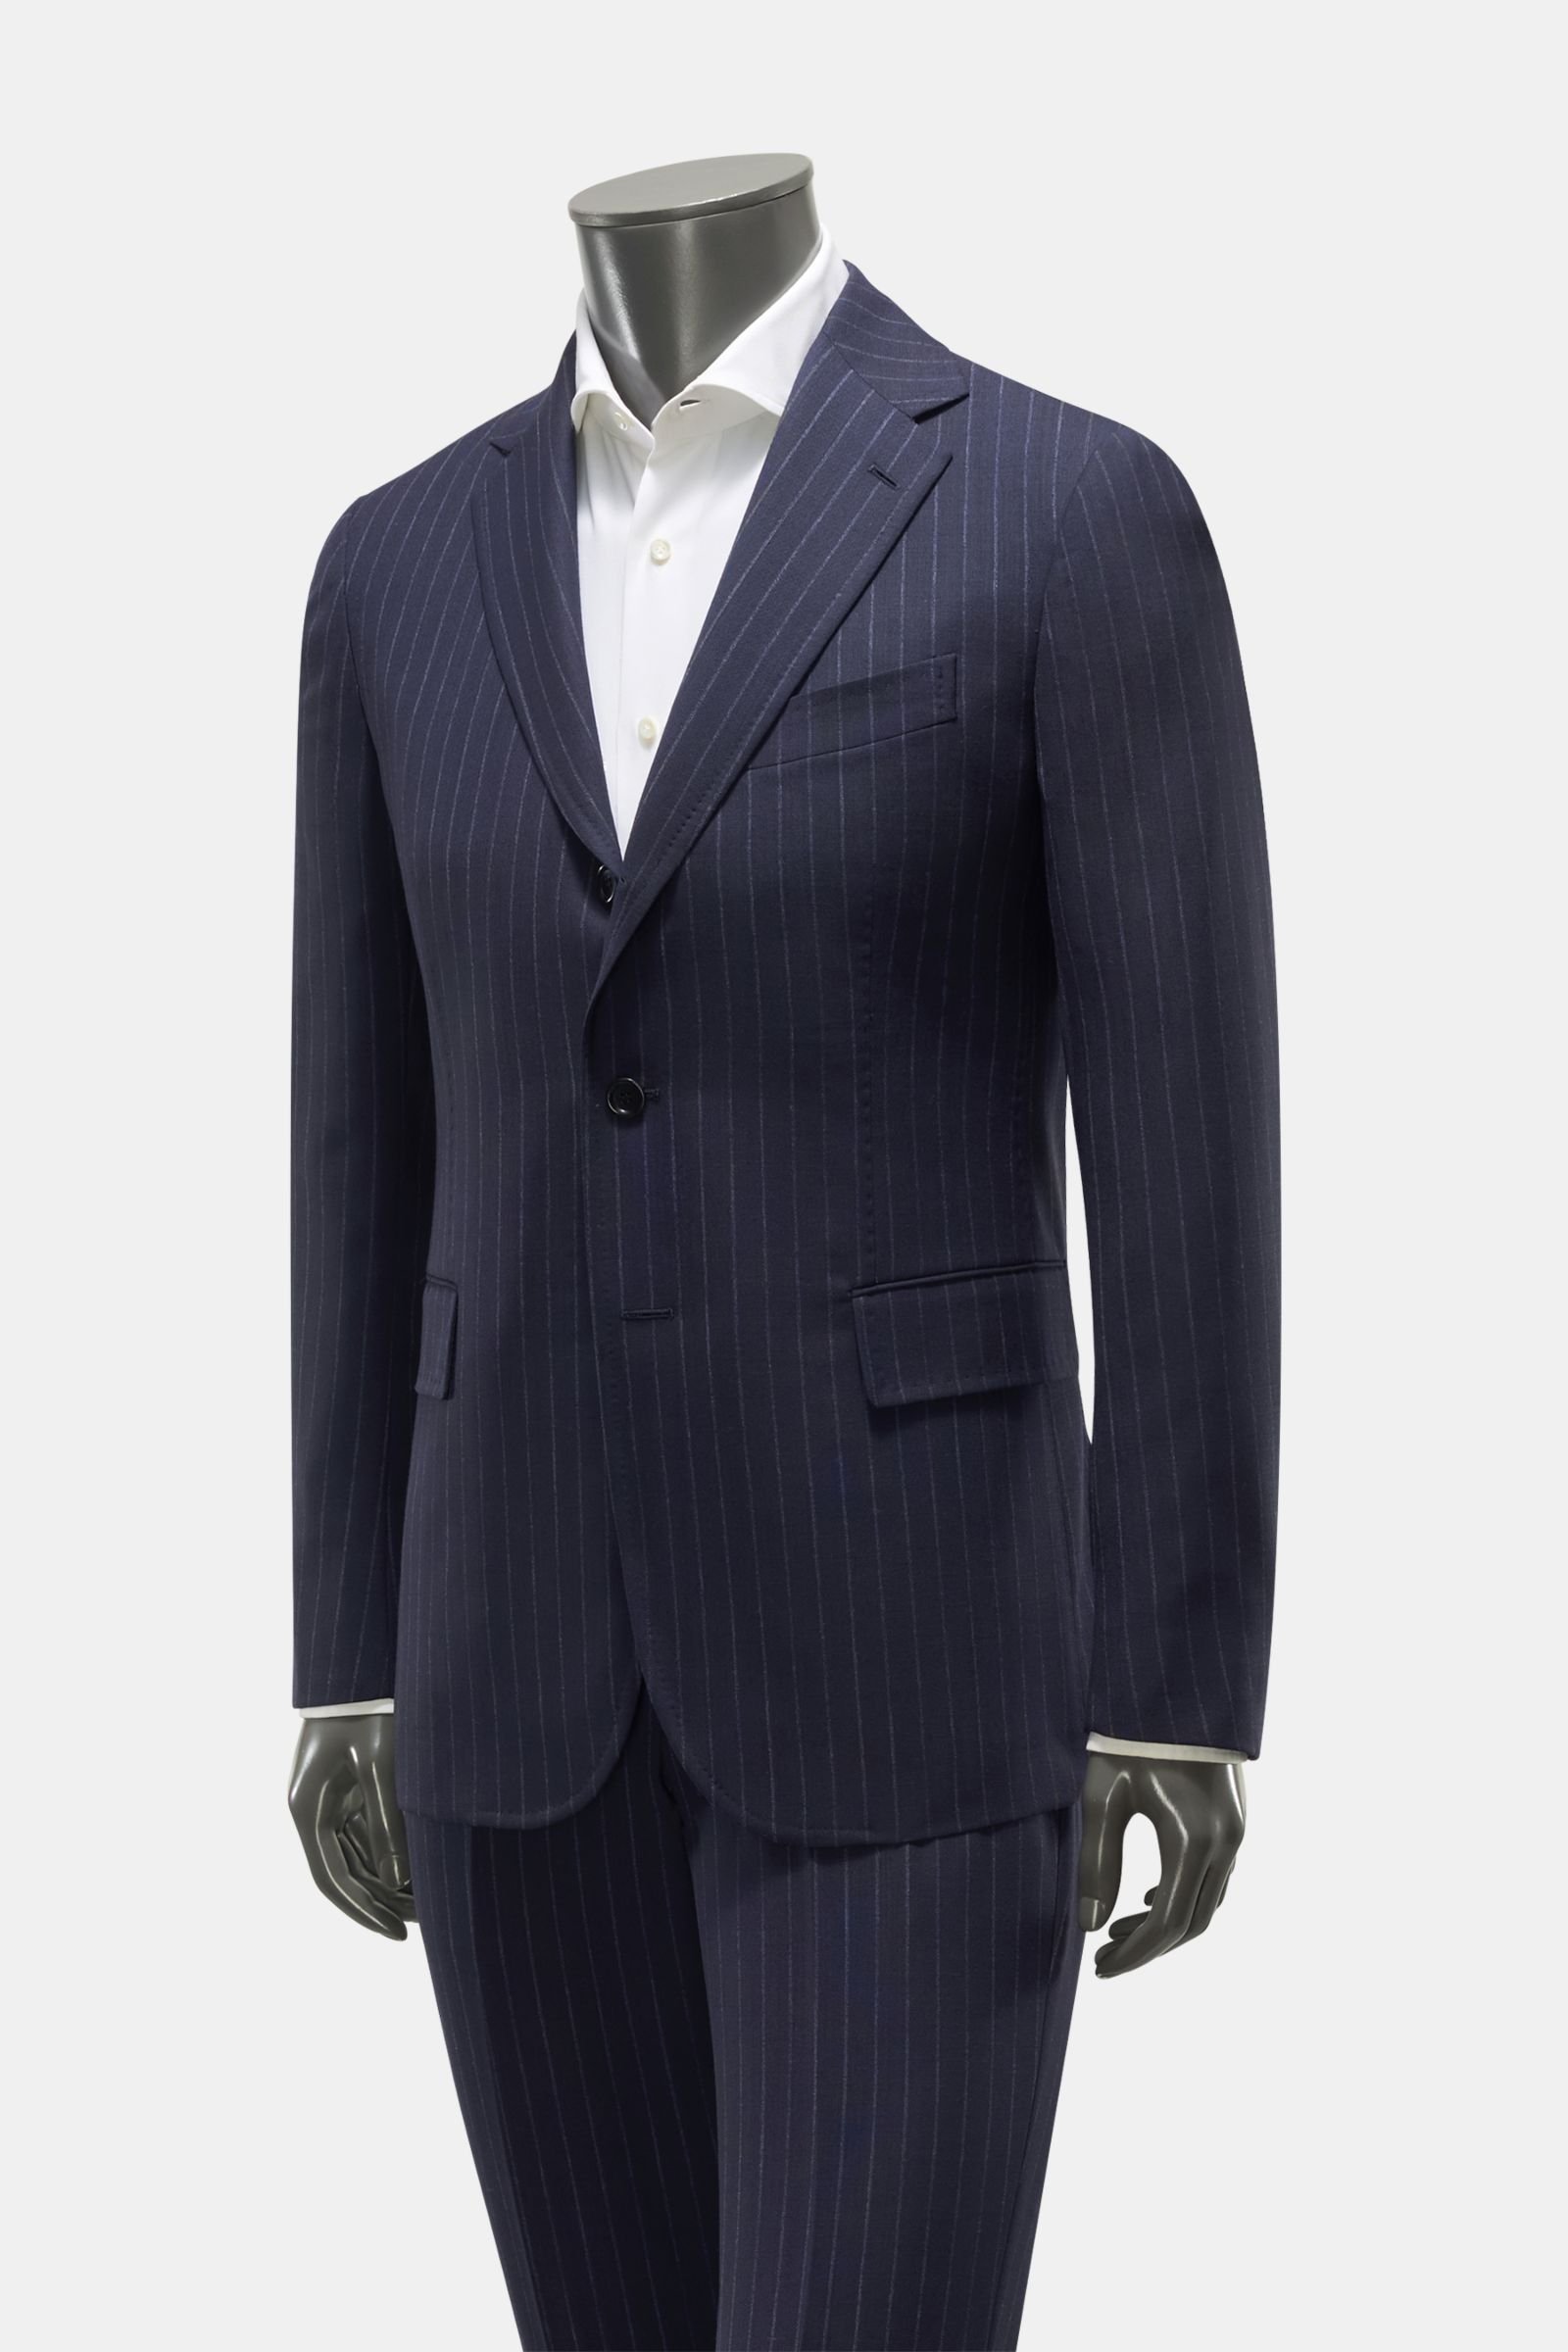 Suit 'Vincenzo' navy/grey striped